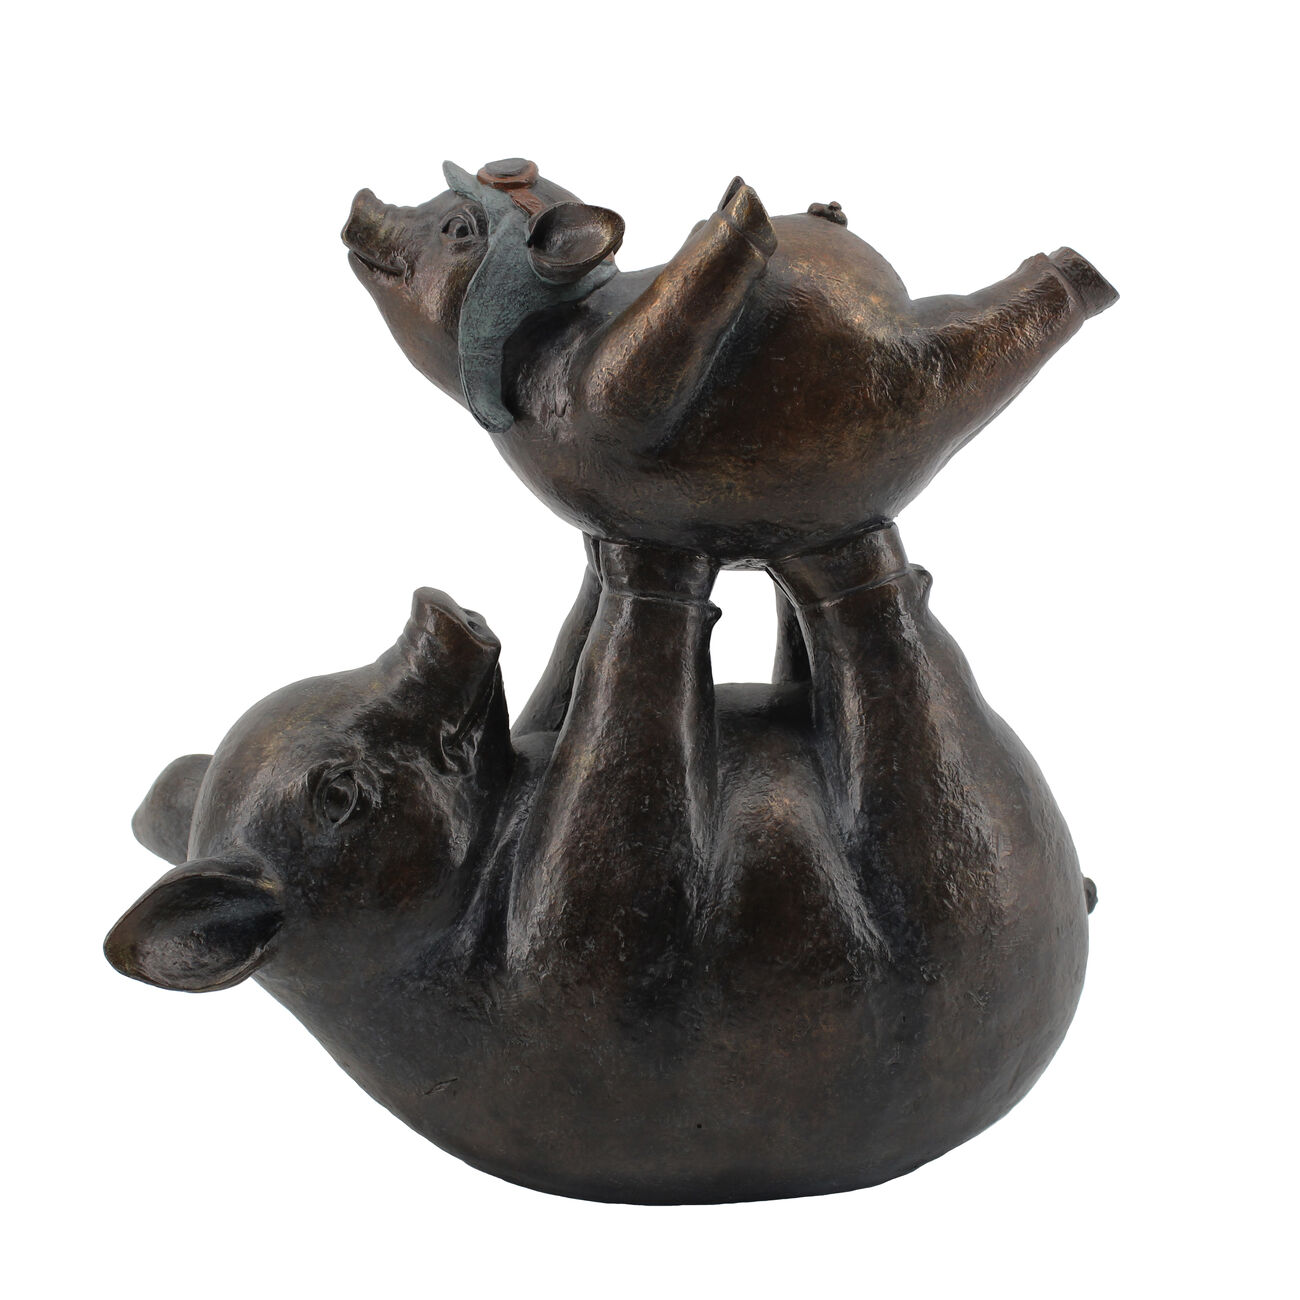 Polyresin Figurine Featuring Father and Son Pig Playing, Bronze